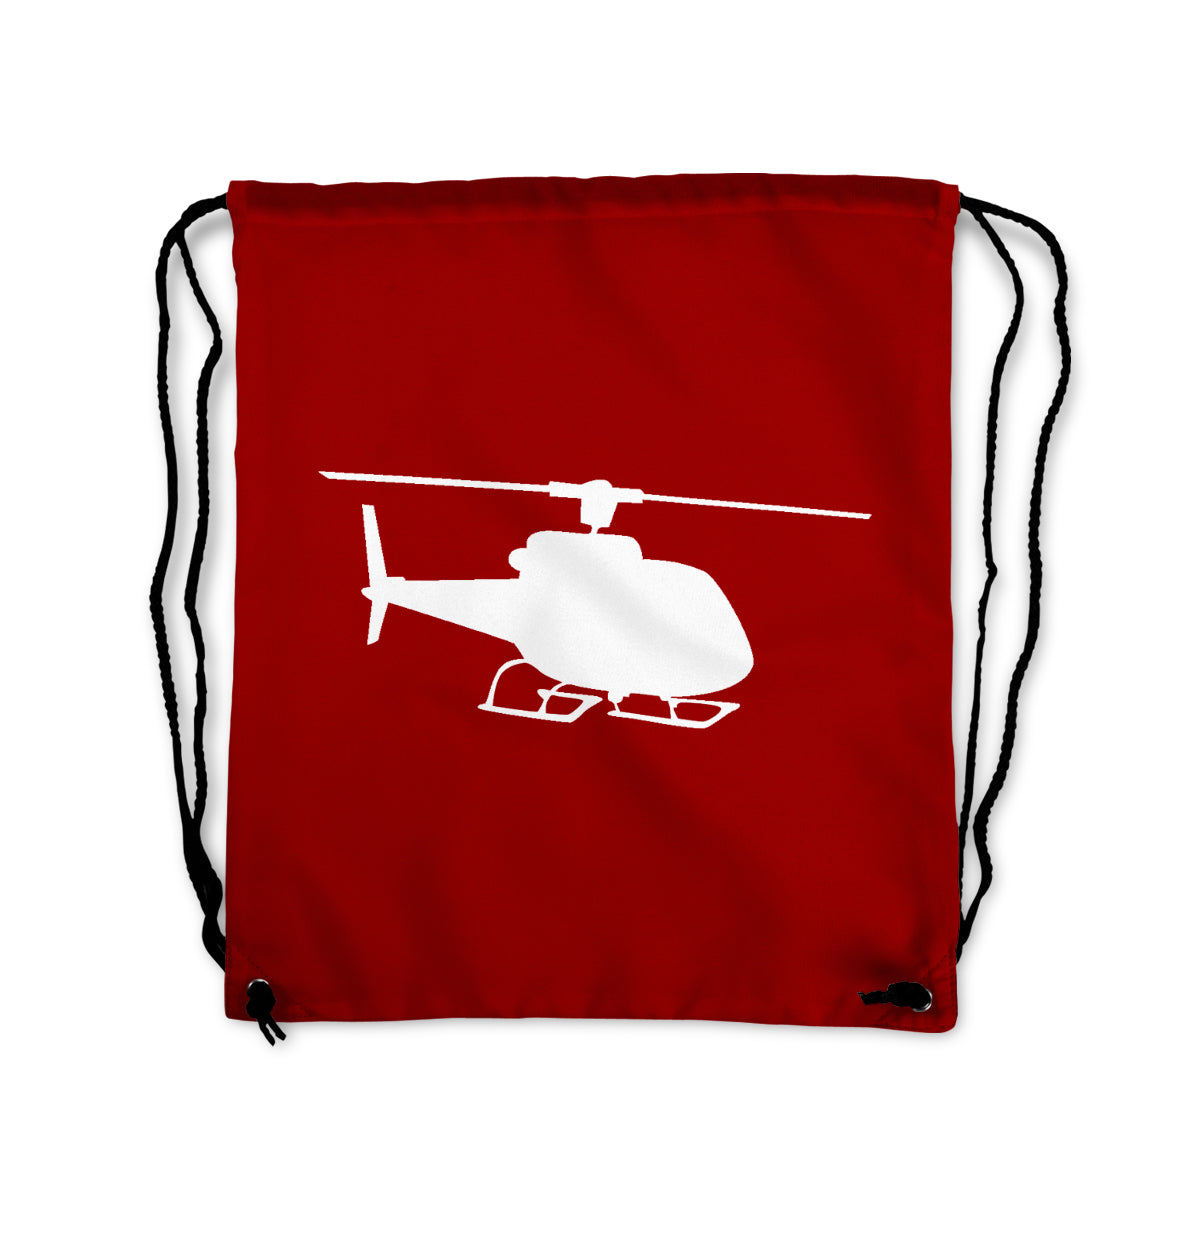 Helicopter Designed Drawstring Bags